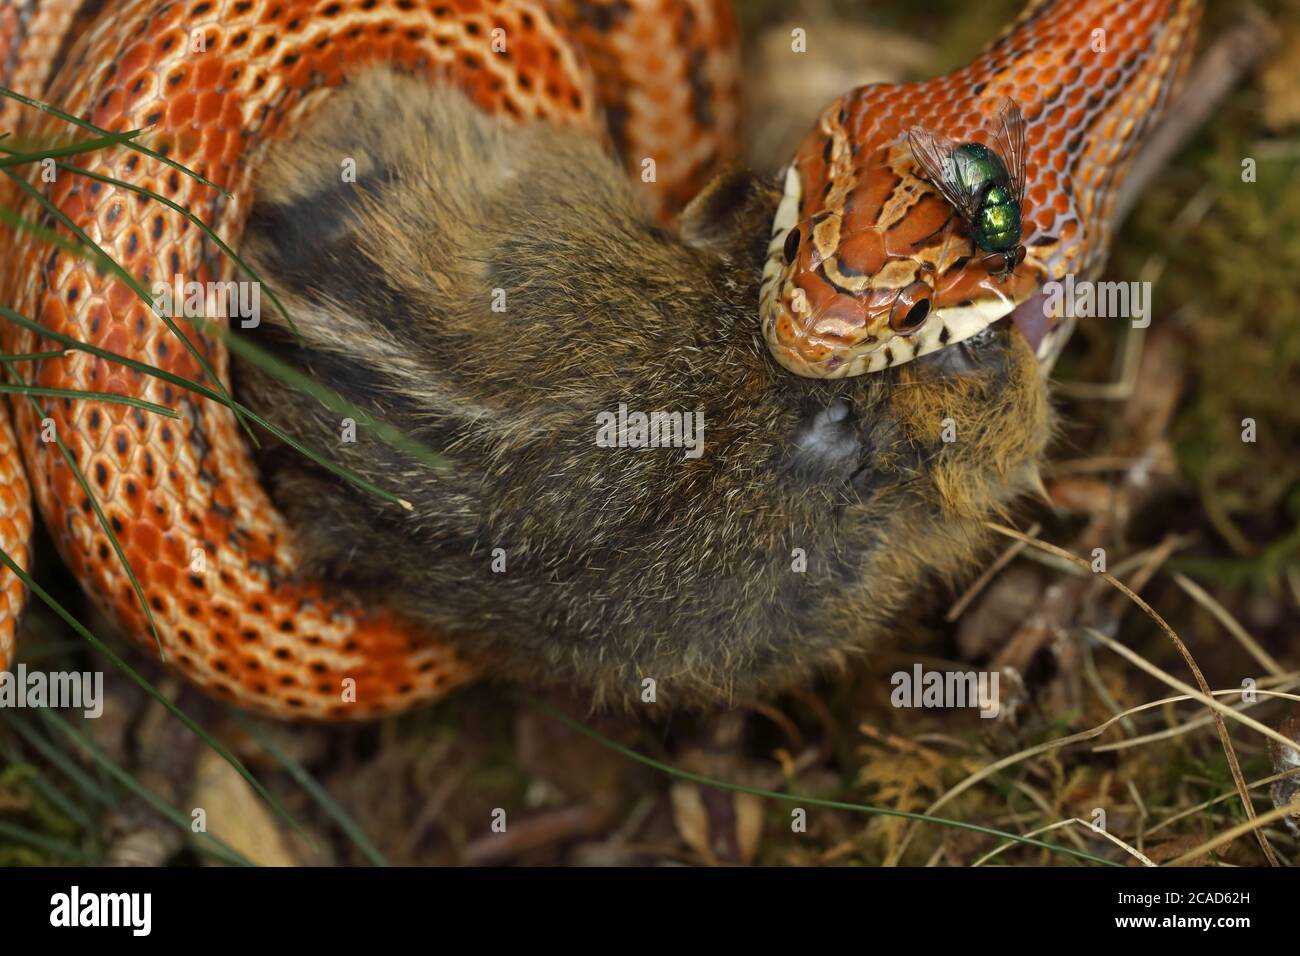 corn snake (Pantherophis guttatus), eating eastern chipmunk found dead and offered to captive snake, native to Eastern United States Stock Photo